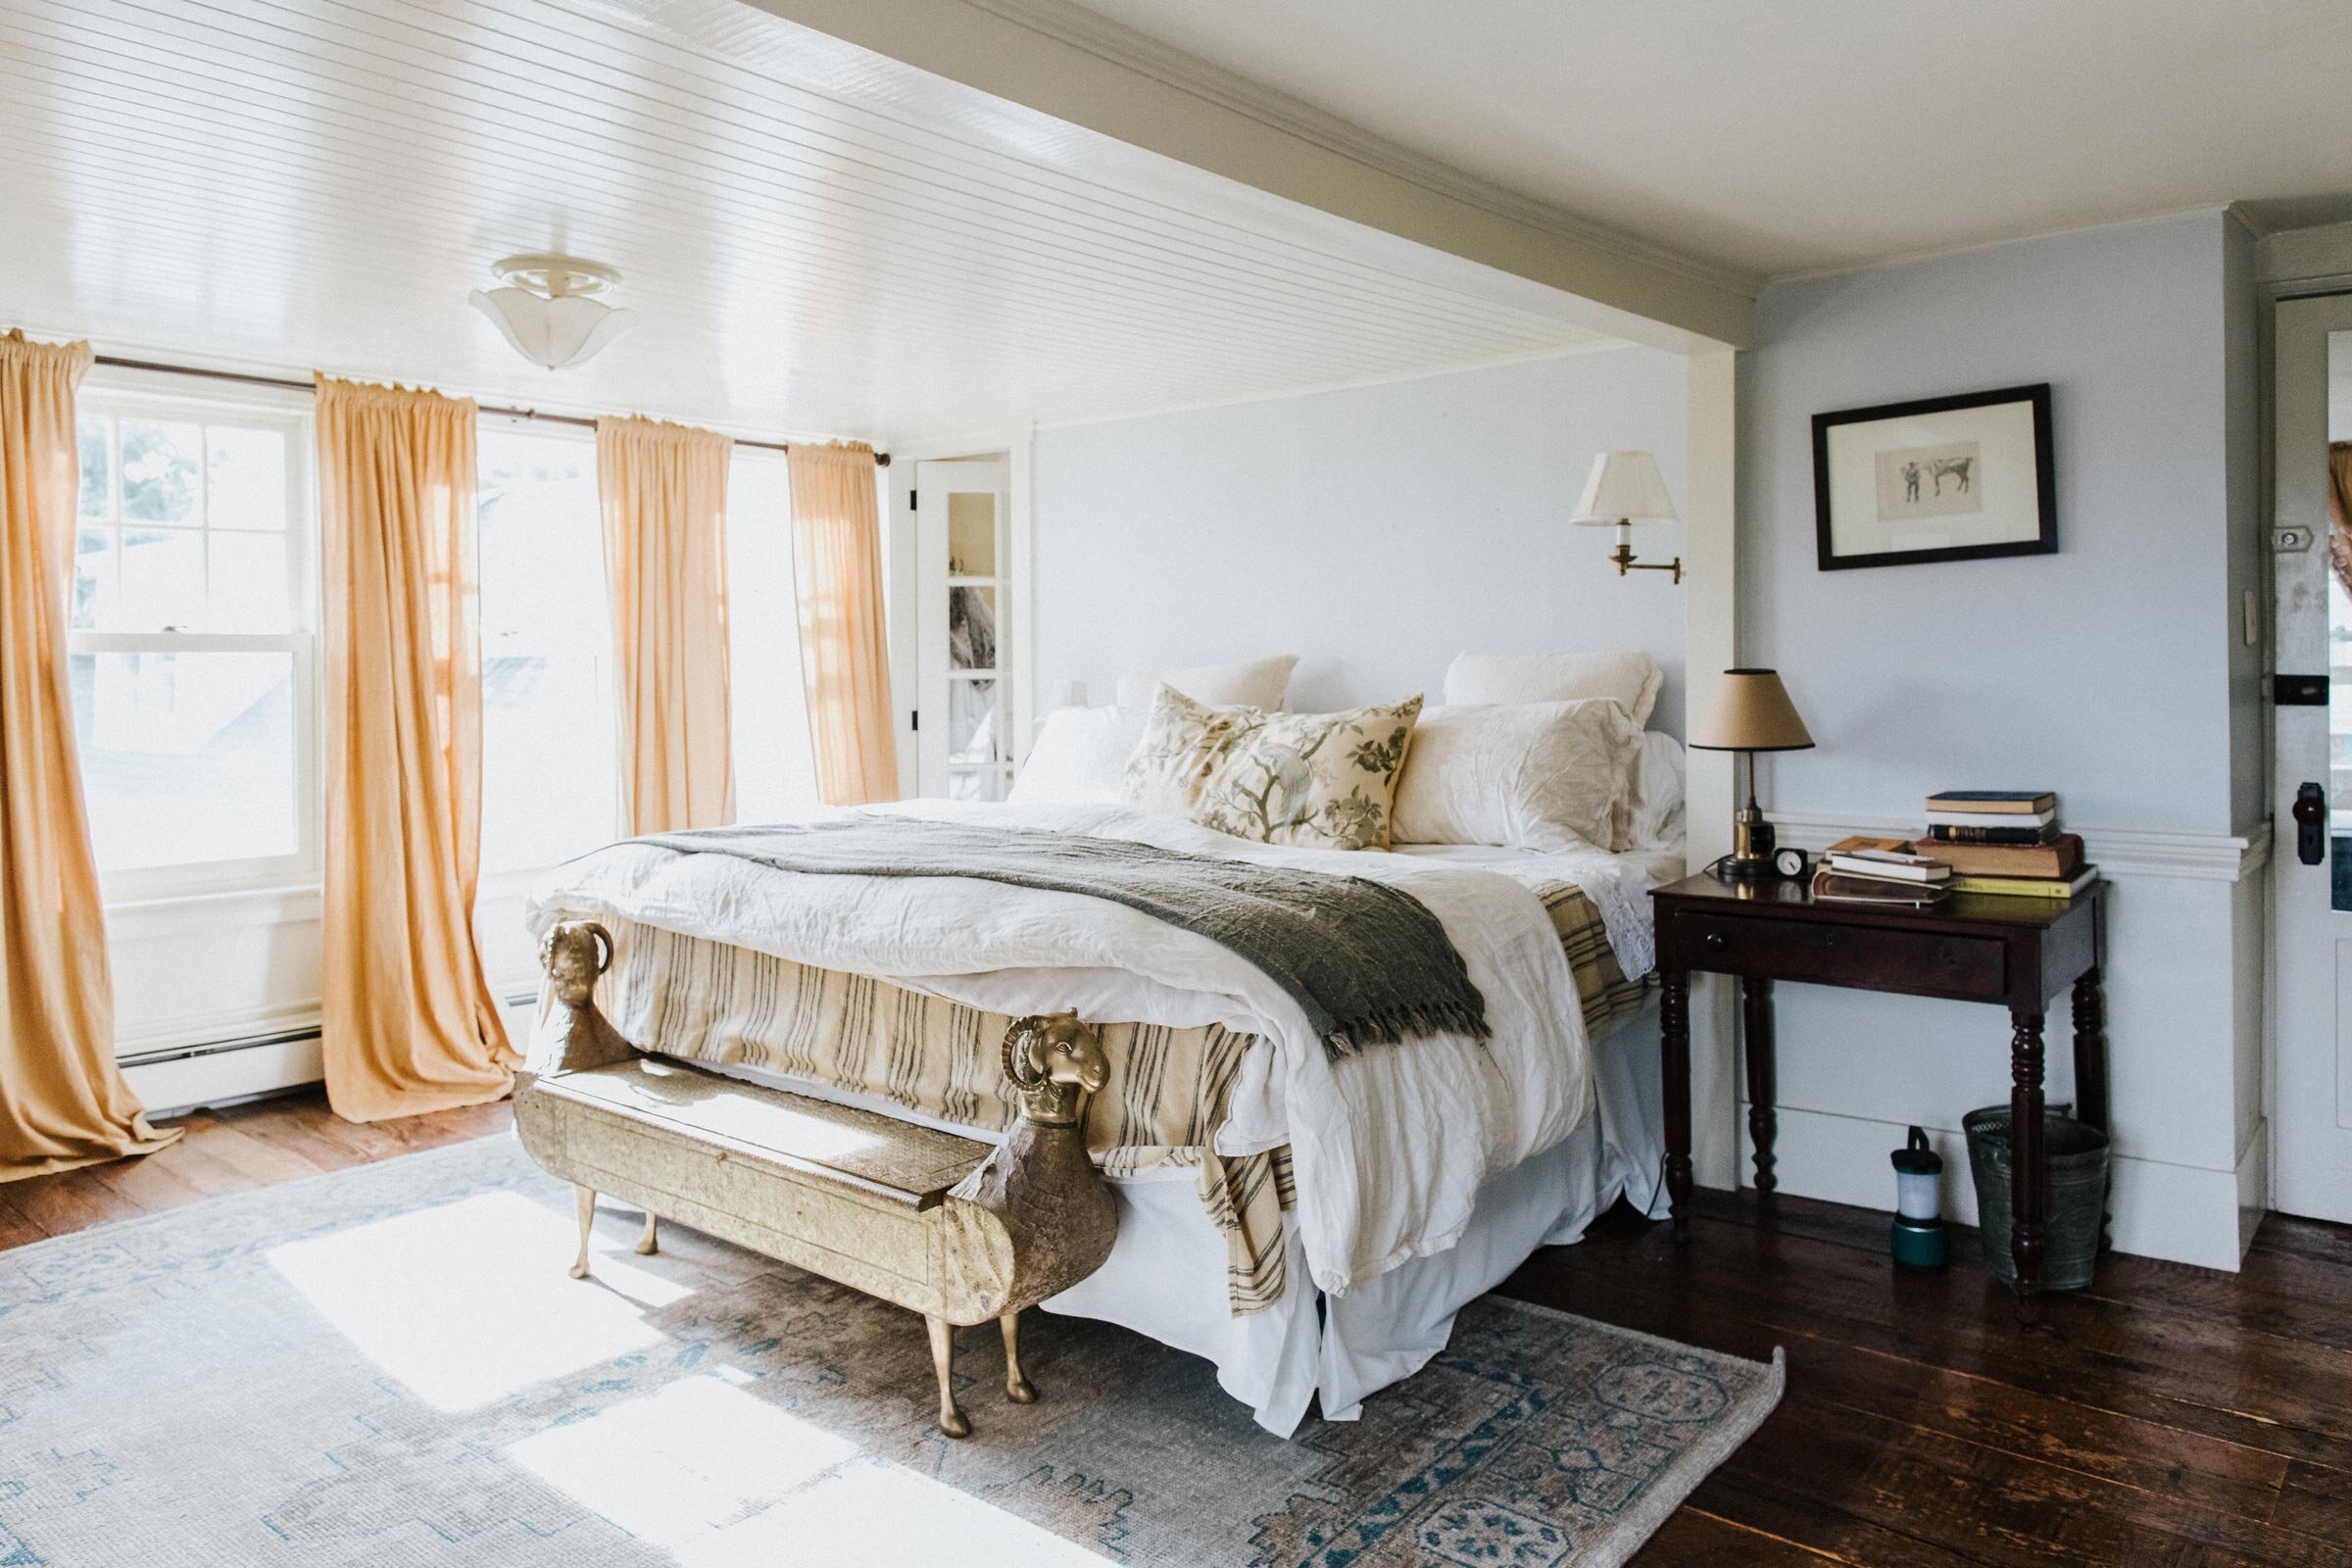  The couple’s light-filled bedroom has views out to the water. Wide-planked floors from the 1700s bring to mind the original purpose of their beloved home as a historic inn. 